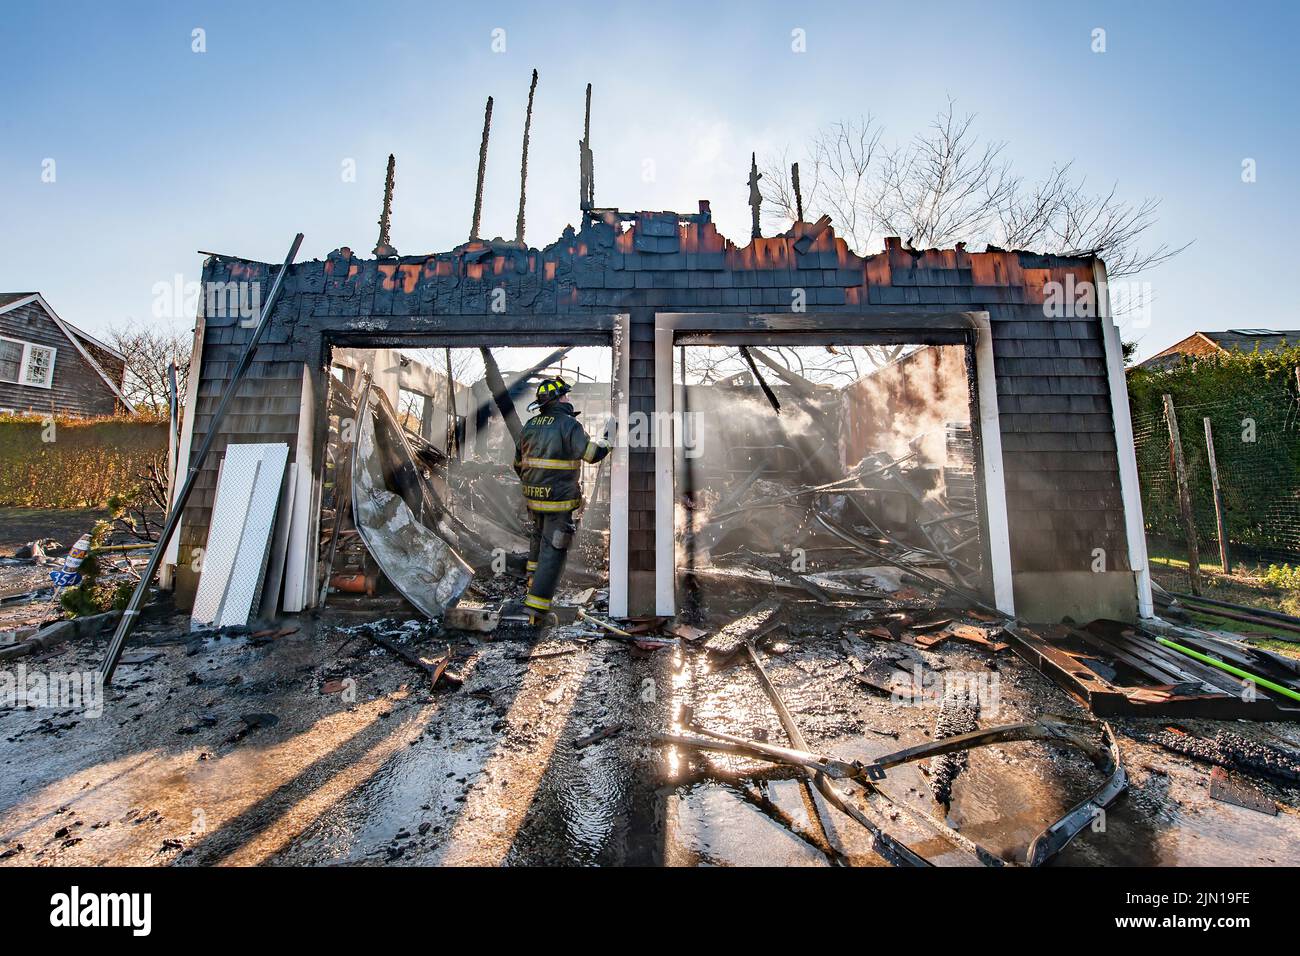 A firefighter surveys the remains after Bridgehampton firefighters wet down and overhauled the remains of a working garage fire at 354 Jobs Lane on Fr Stock Photo